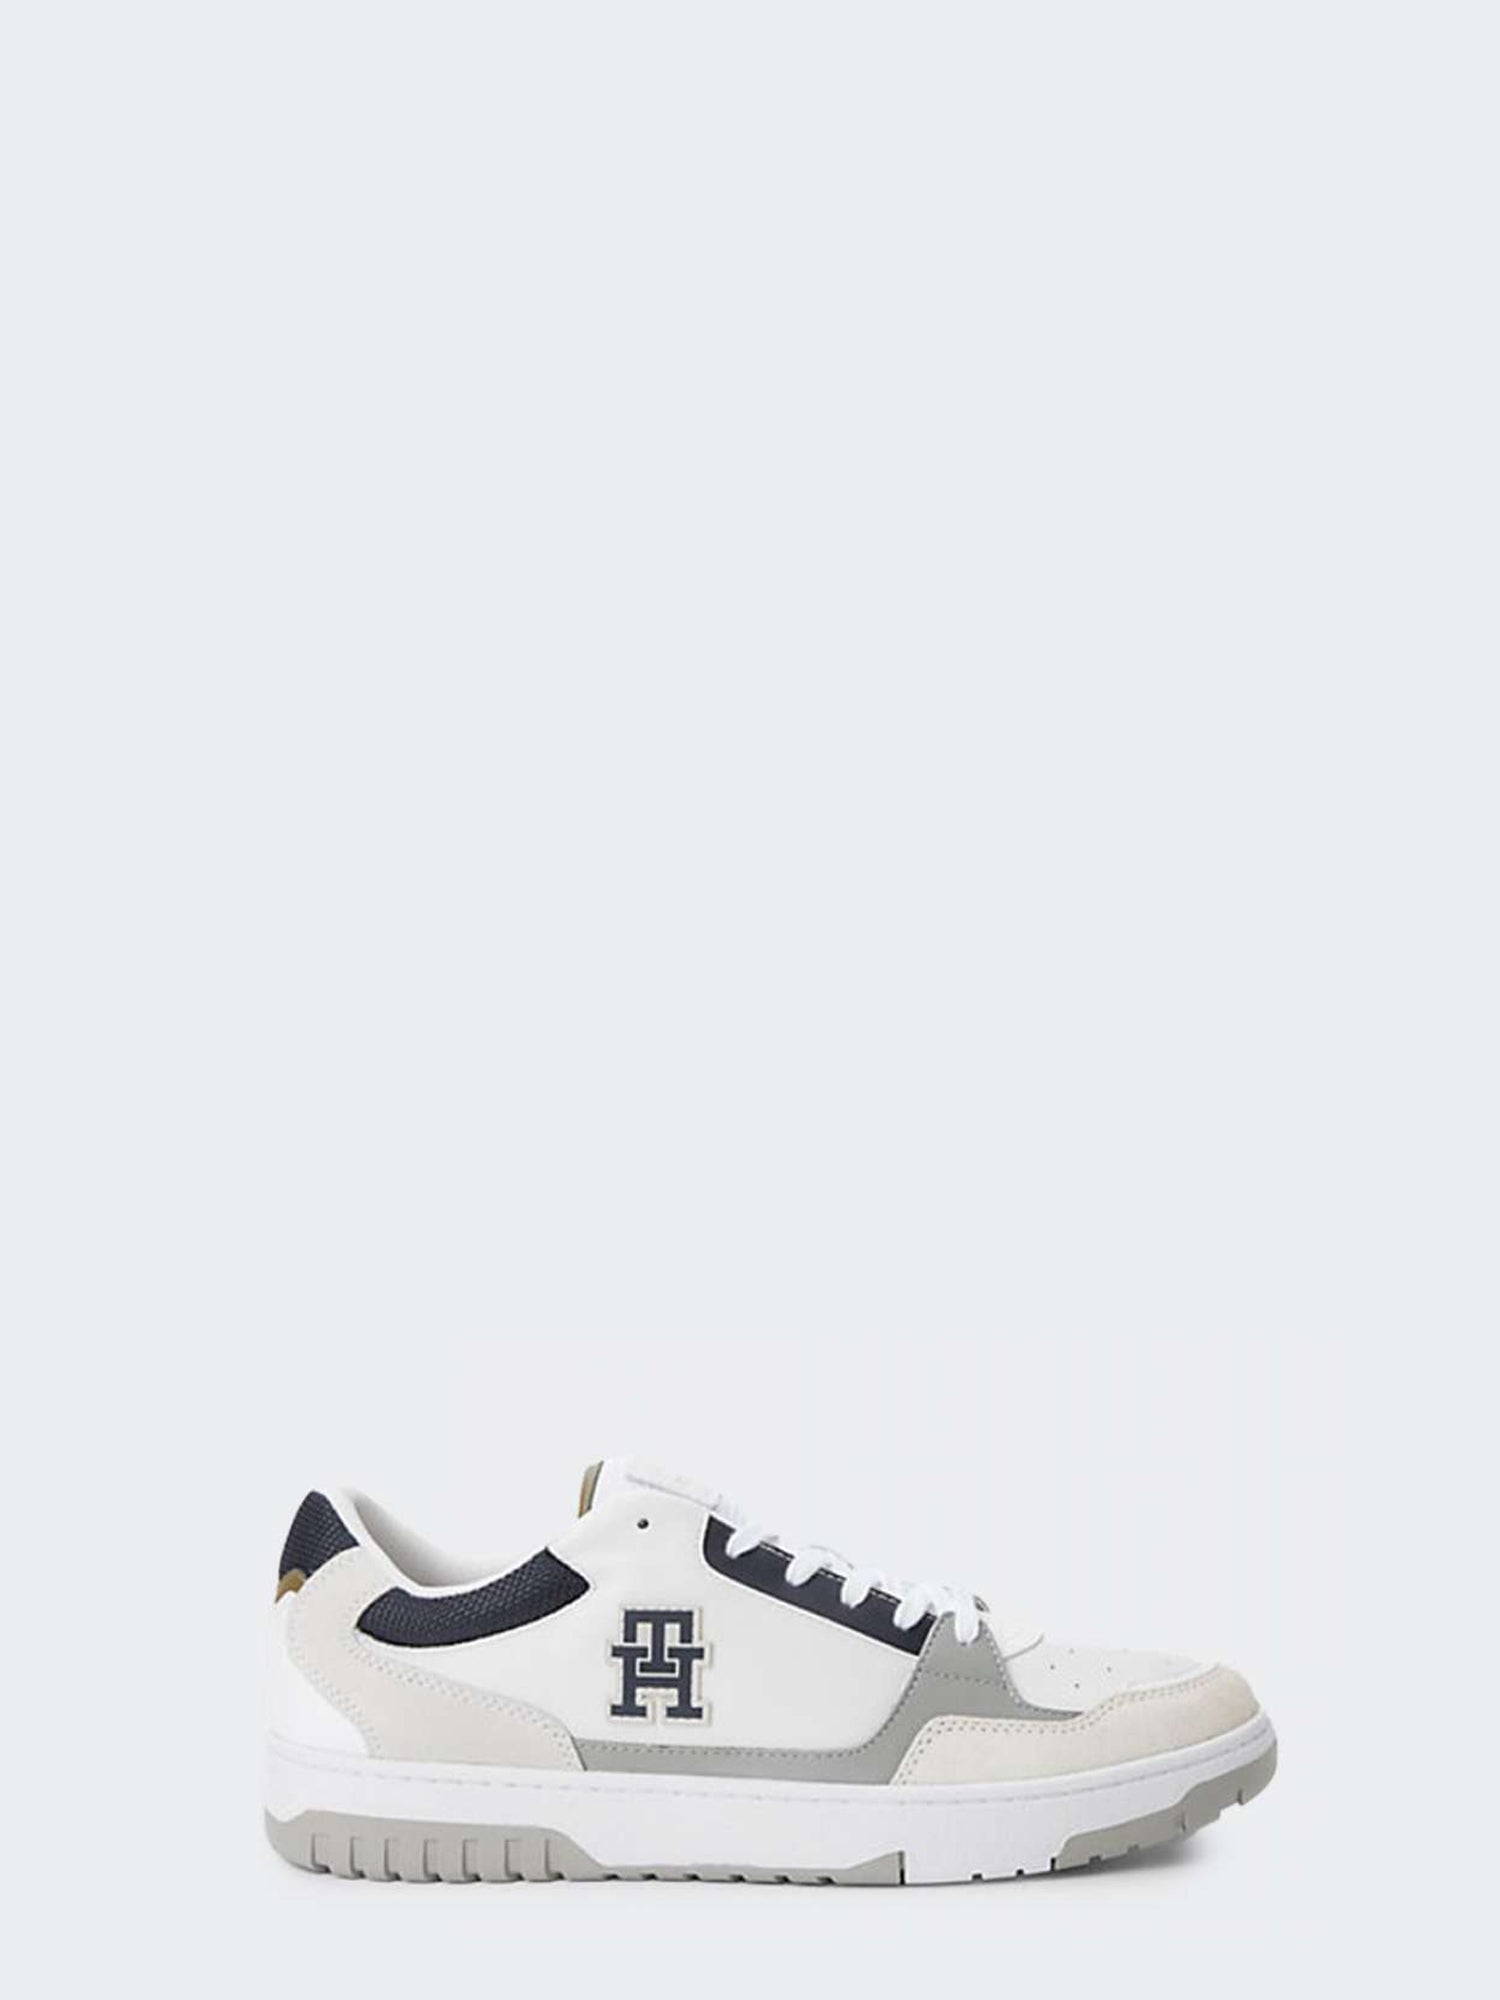 TOMMY HILFIGER SHOES BASSE IN PELLE BIANCO-GRIGIO